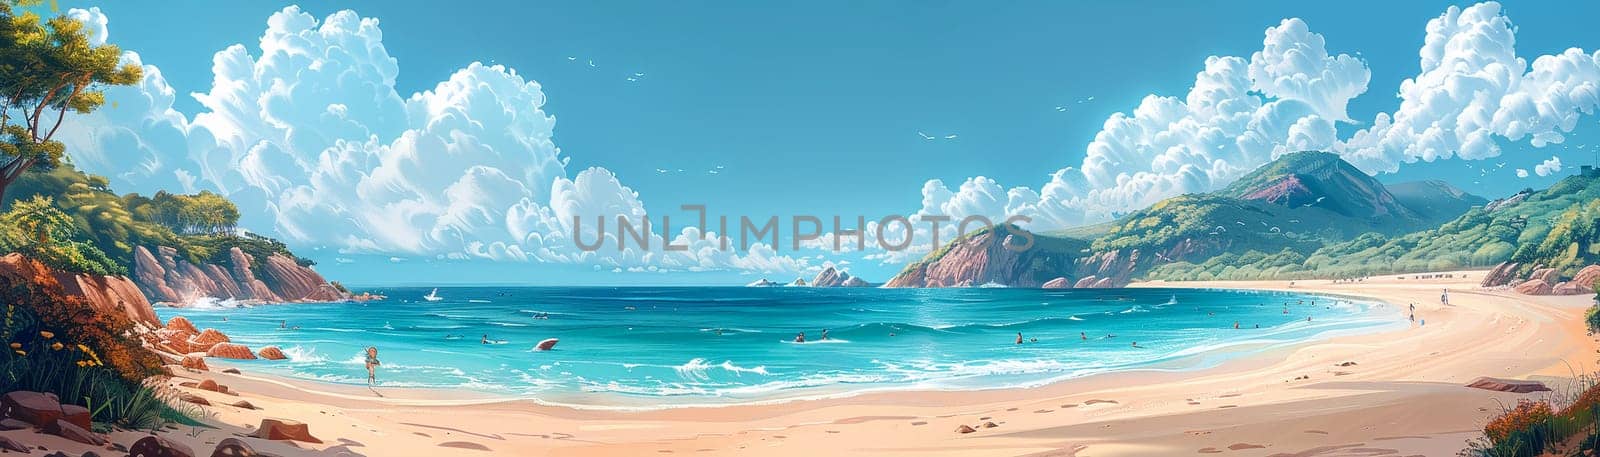 Cartoon illustration of a lively beach day, designed with cute characters and bright, sunny colors.